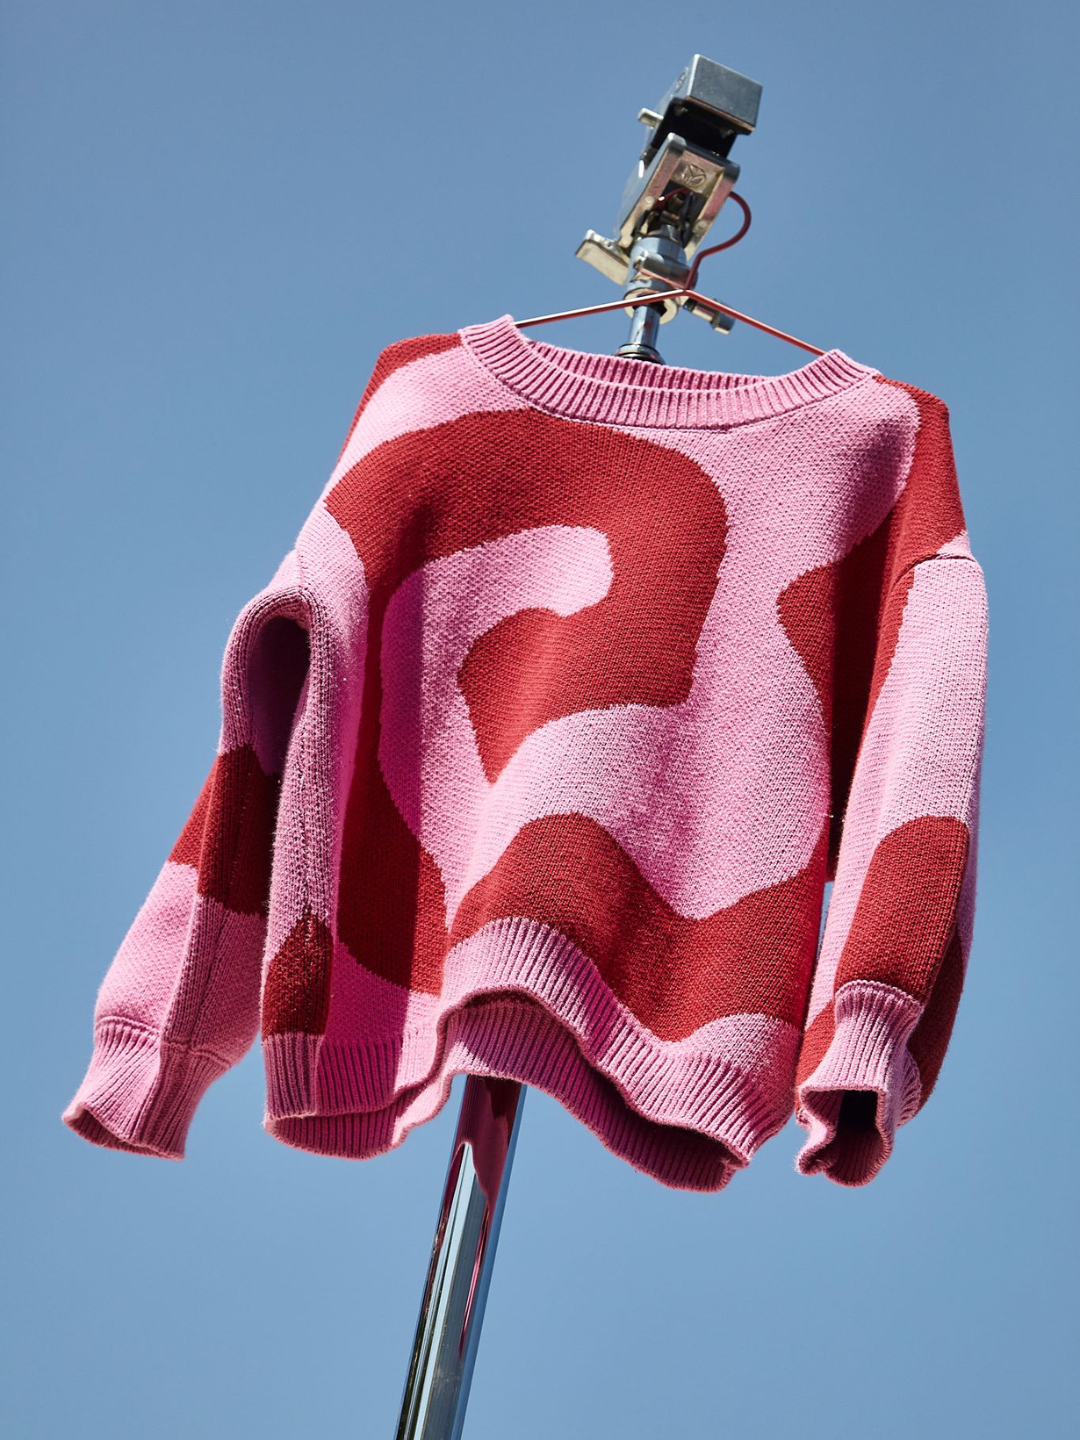 Front view of kids crewneck sweater in bright pink, with a large single red swirl design that covers the entire sweater. The sweater is shown on a hanger, hanging from a metal photography stand, against a blue sky.